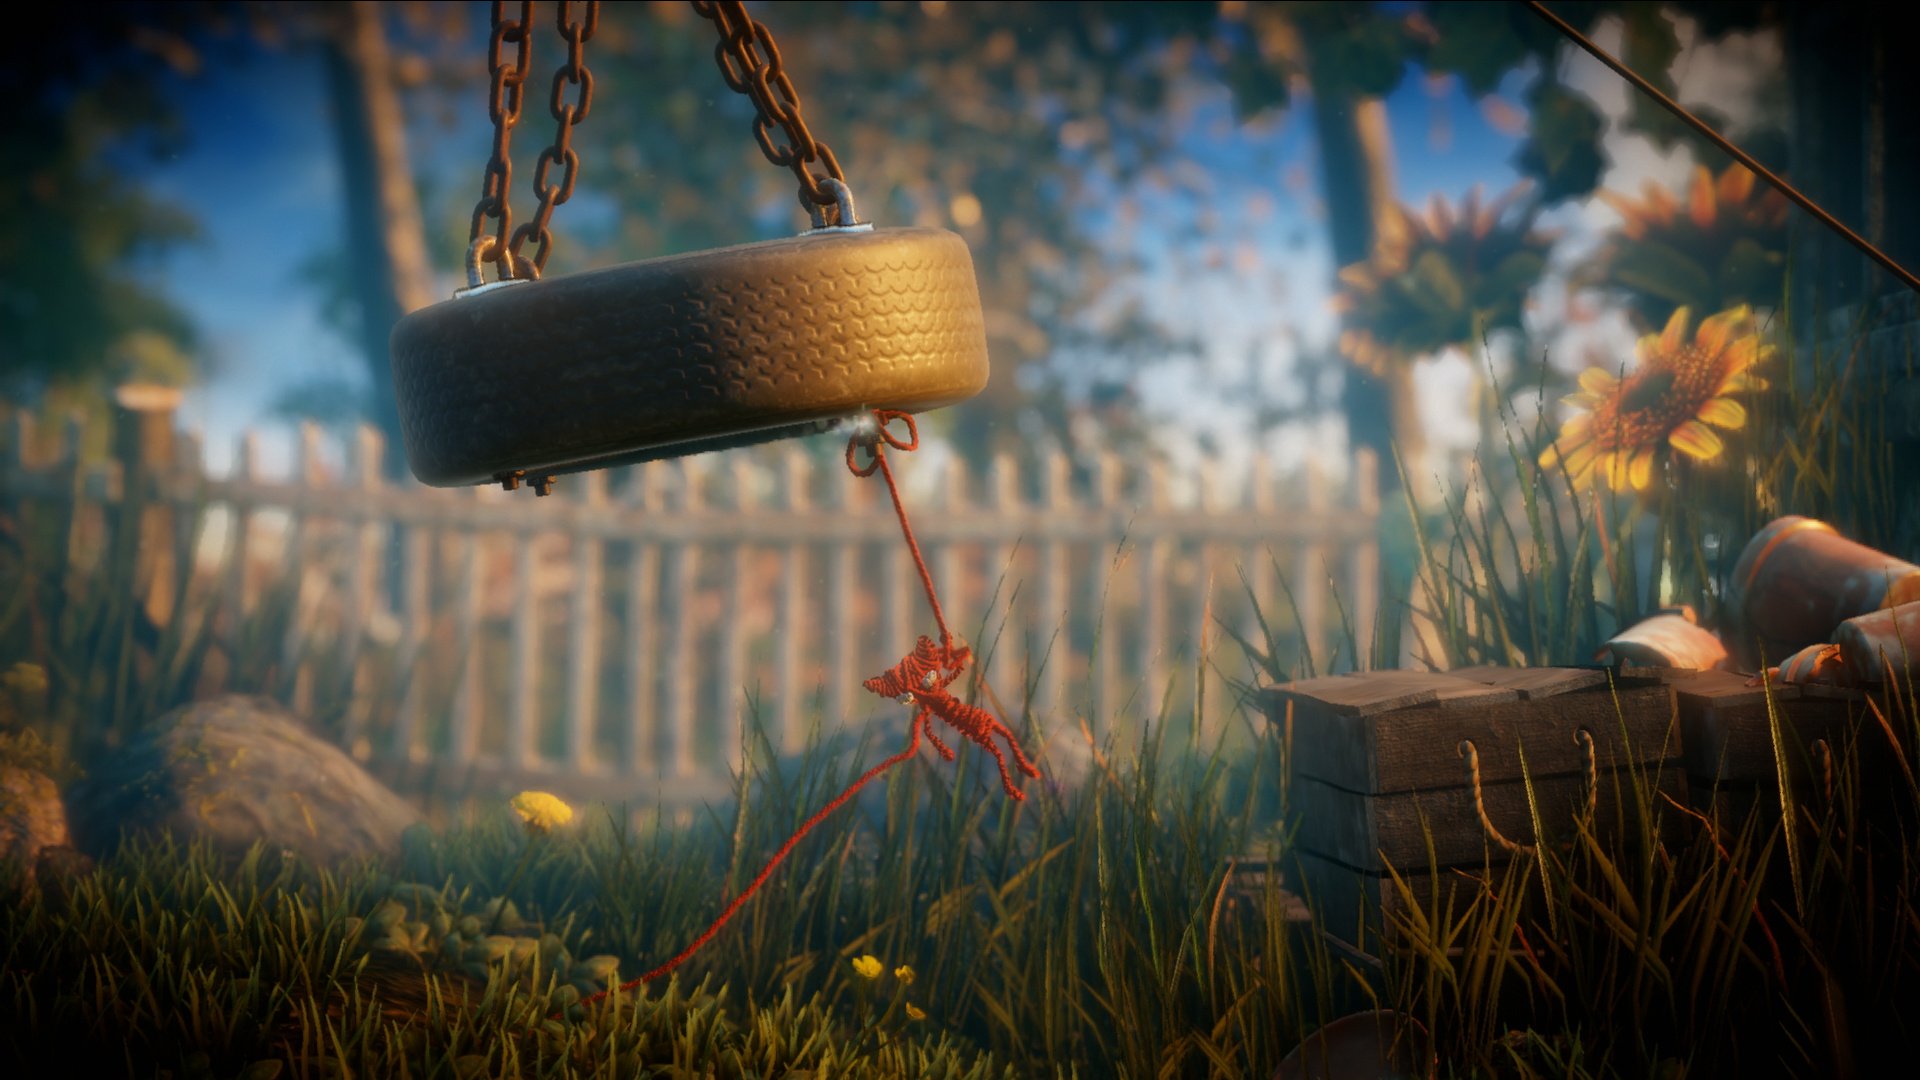 Unravel (PS4 / PlayStation 4) Game Profile | News, Reviews, Videos